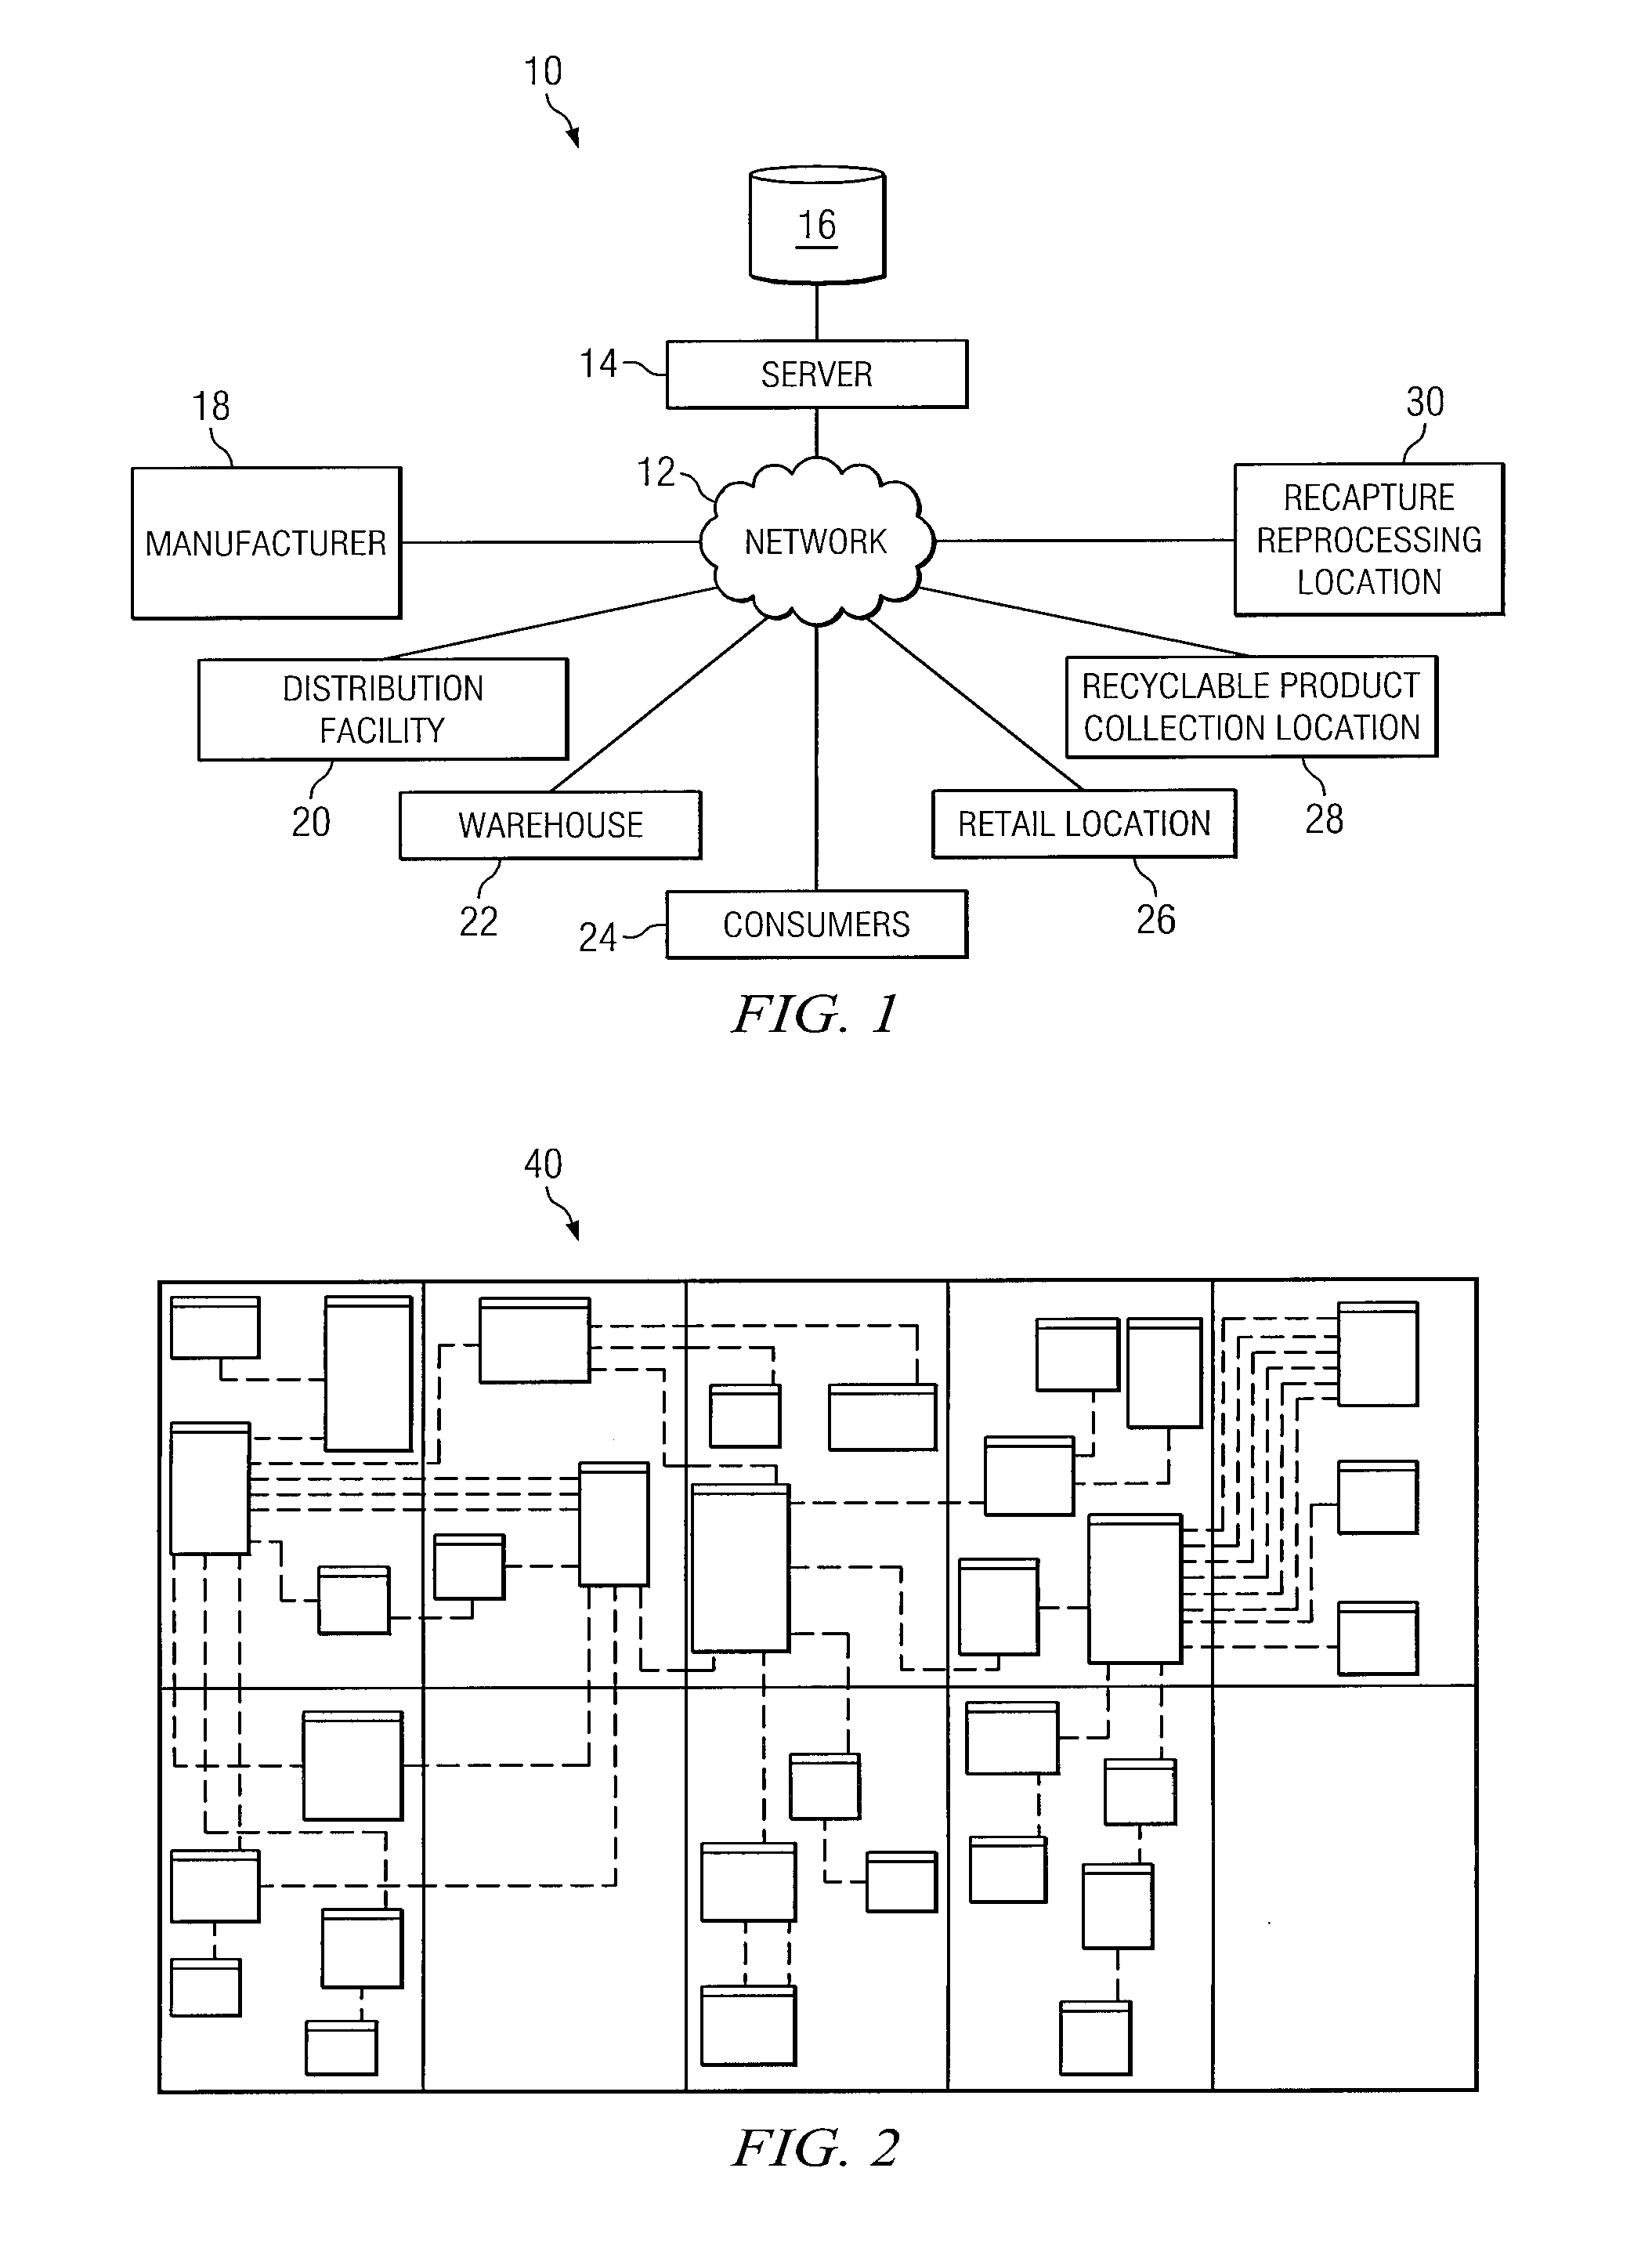 Systems and methods used in the operation of a recycling enterprise